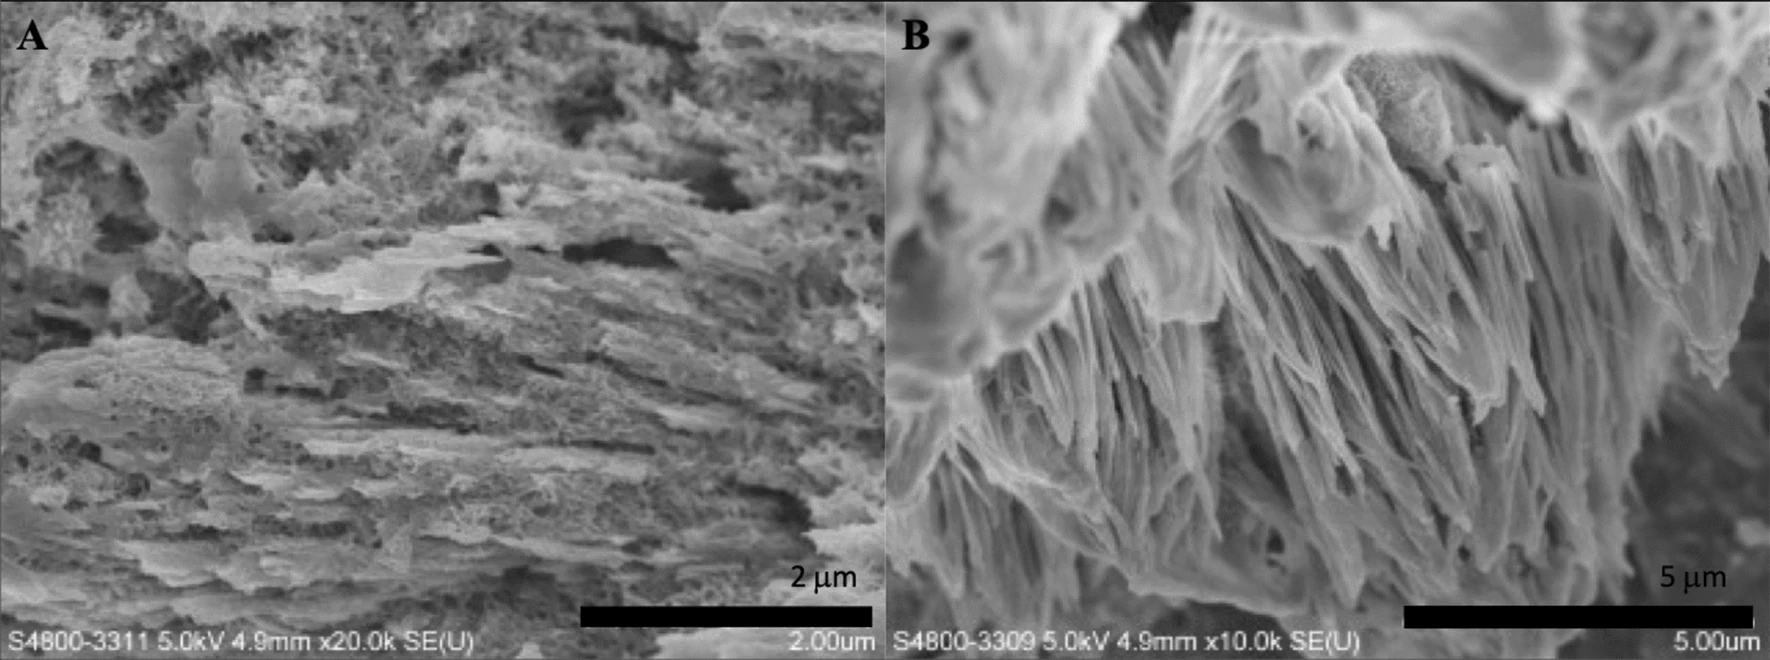 SEM micrographs of the synthesized biomaterial treated with a current of 10 mA, after 10 h mineralization. (A 20.0 k?×?magnification; B 10.0 k?×?magnification).